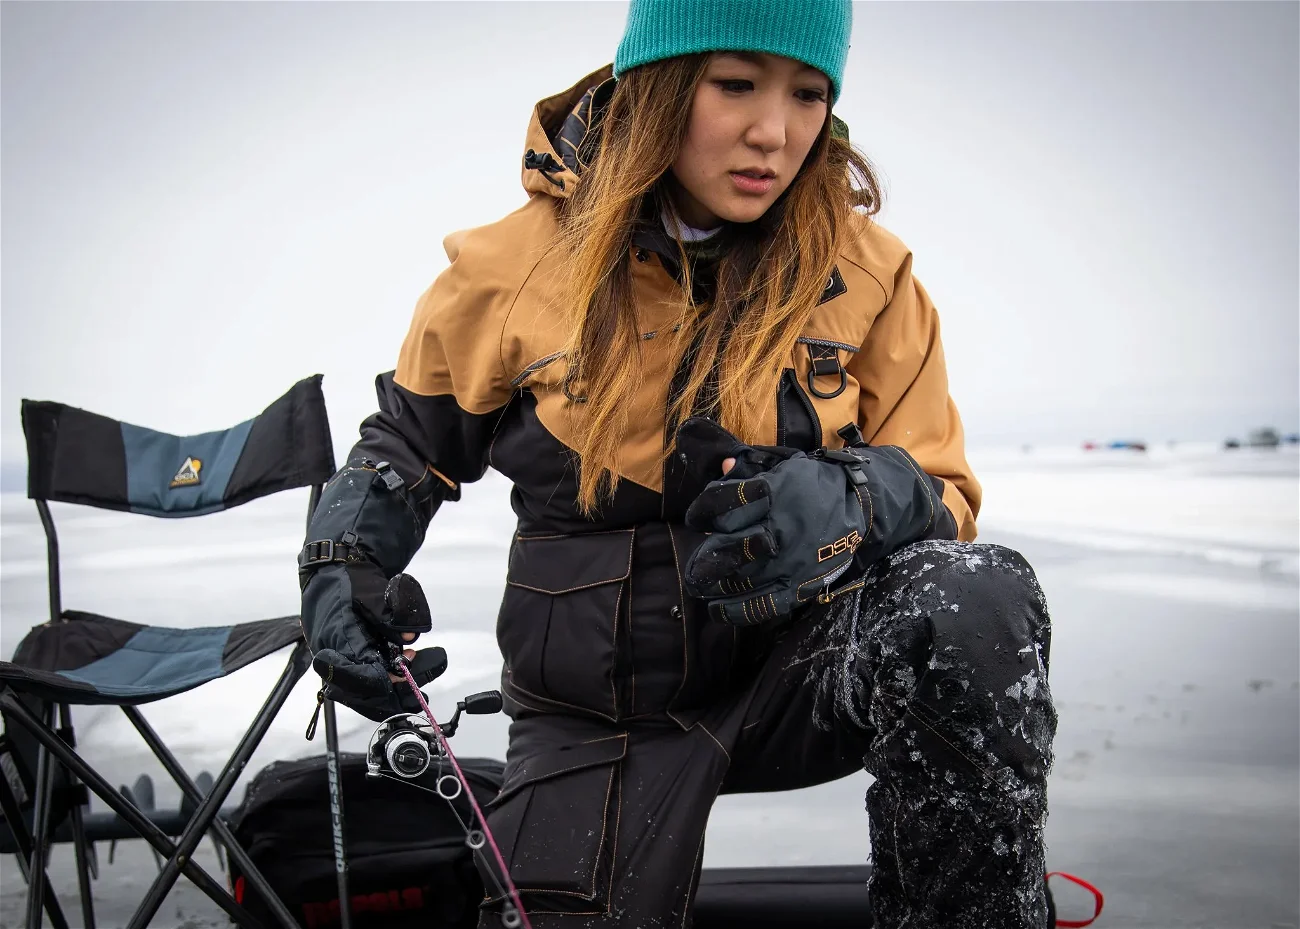 DSG Outerwear Avid Ice Fishing Gloves Are Incredibly Versatile